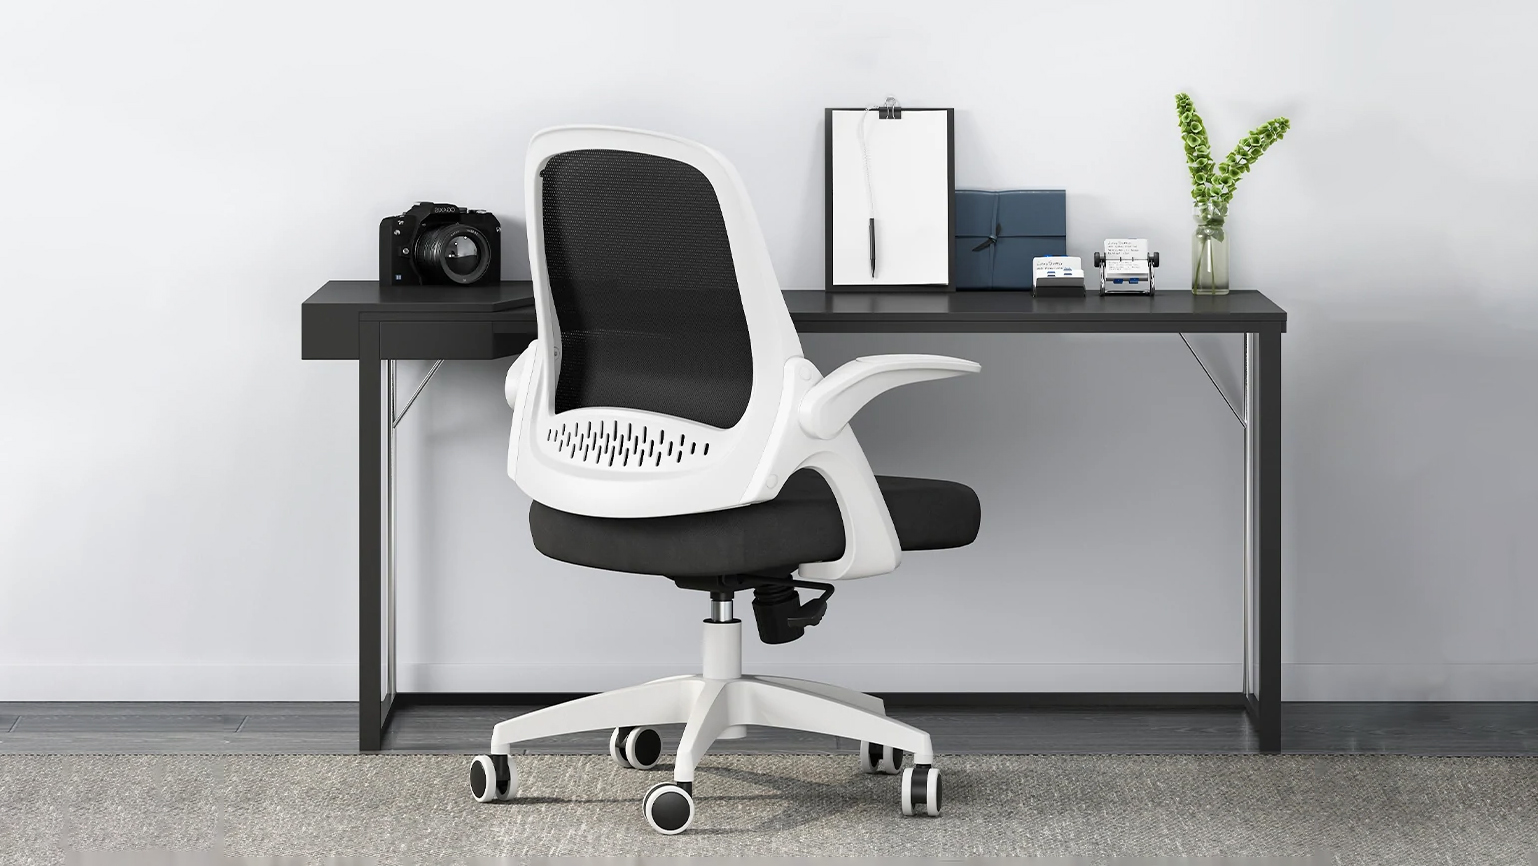 Hbada office chair review: A budget-friendly companion for working